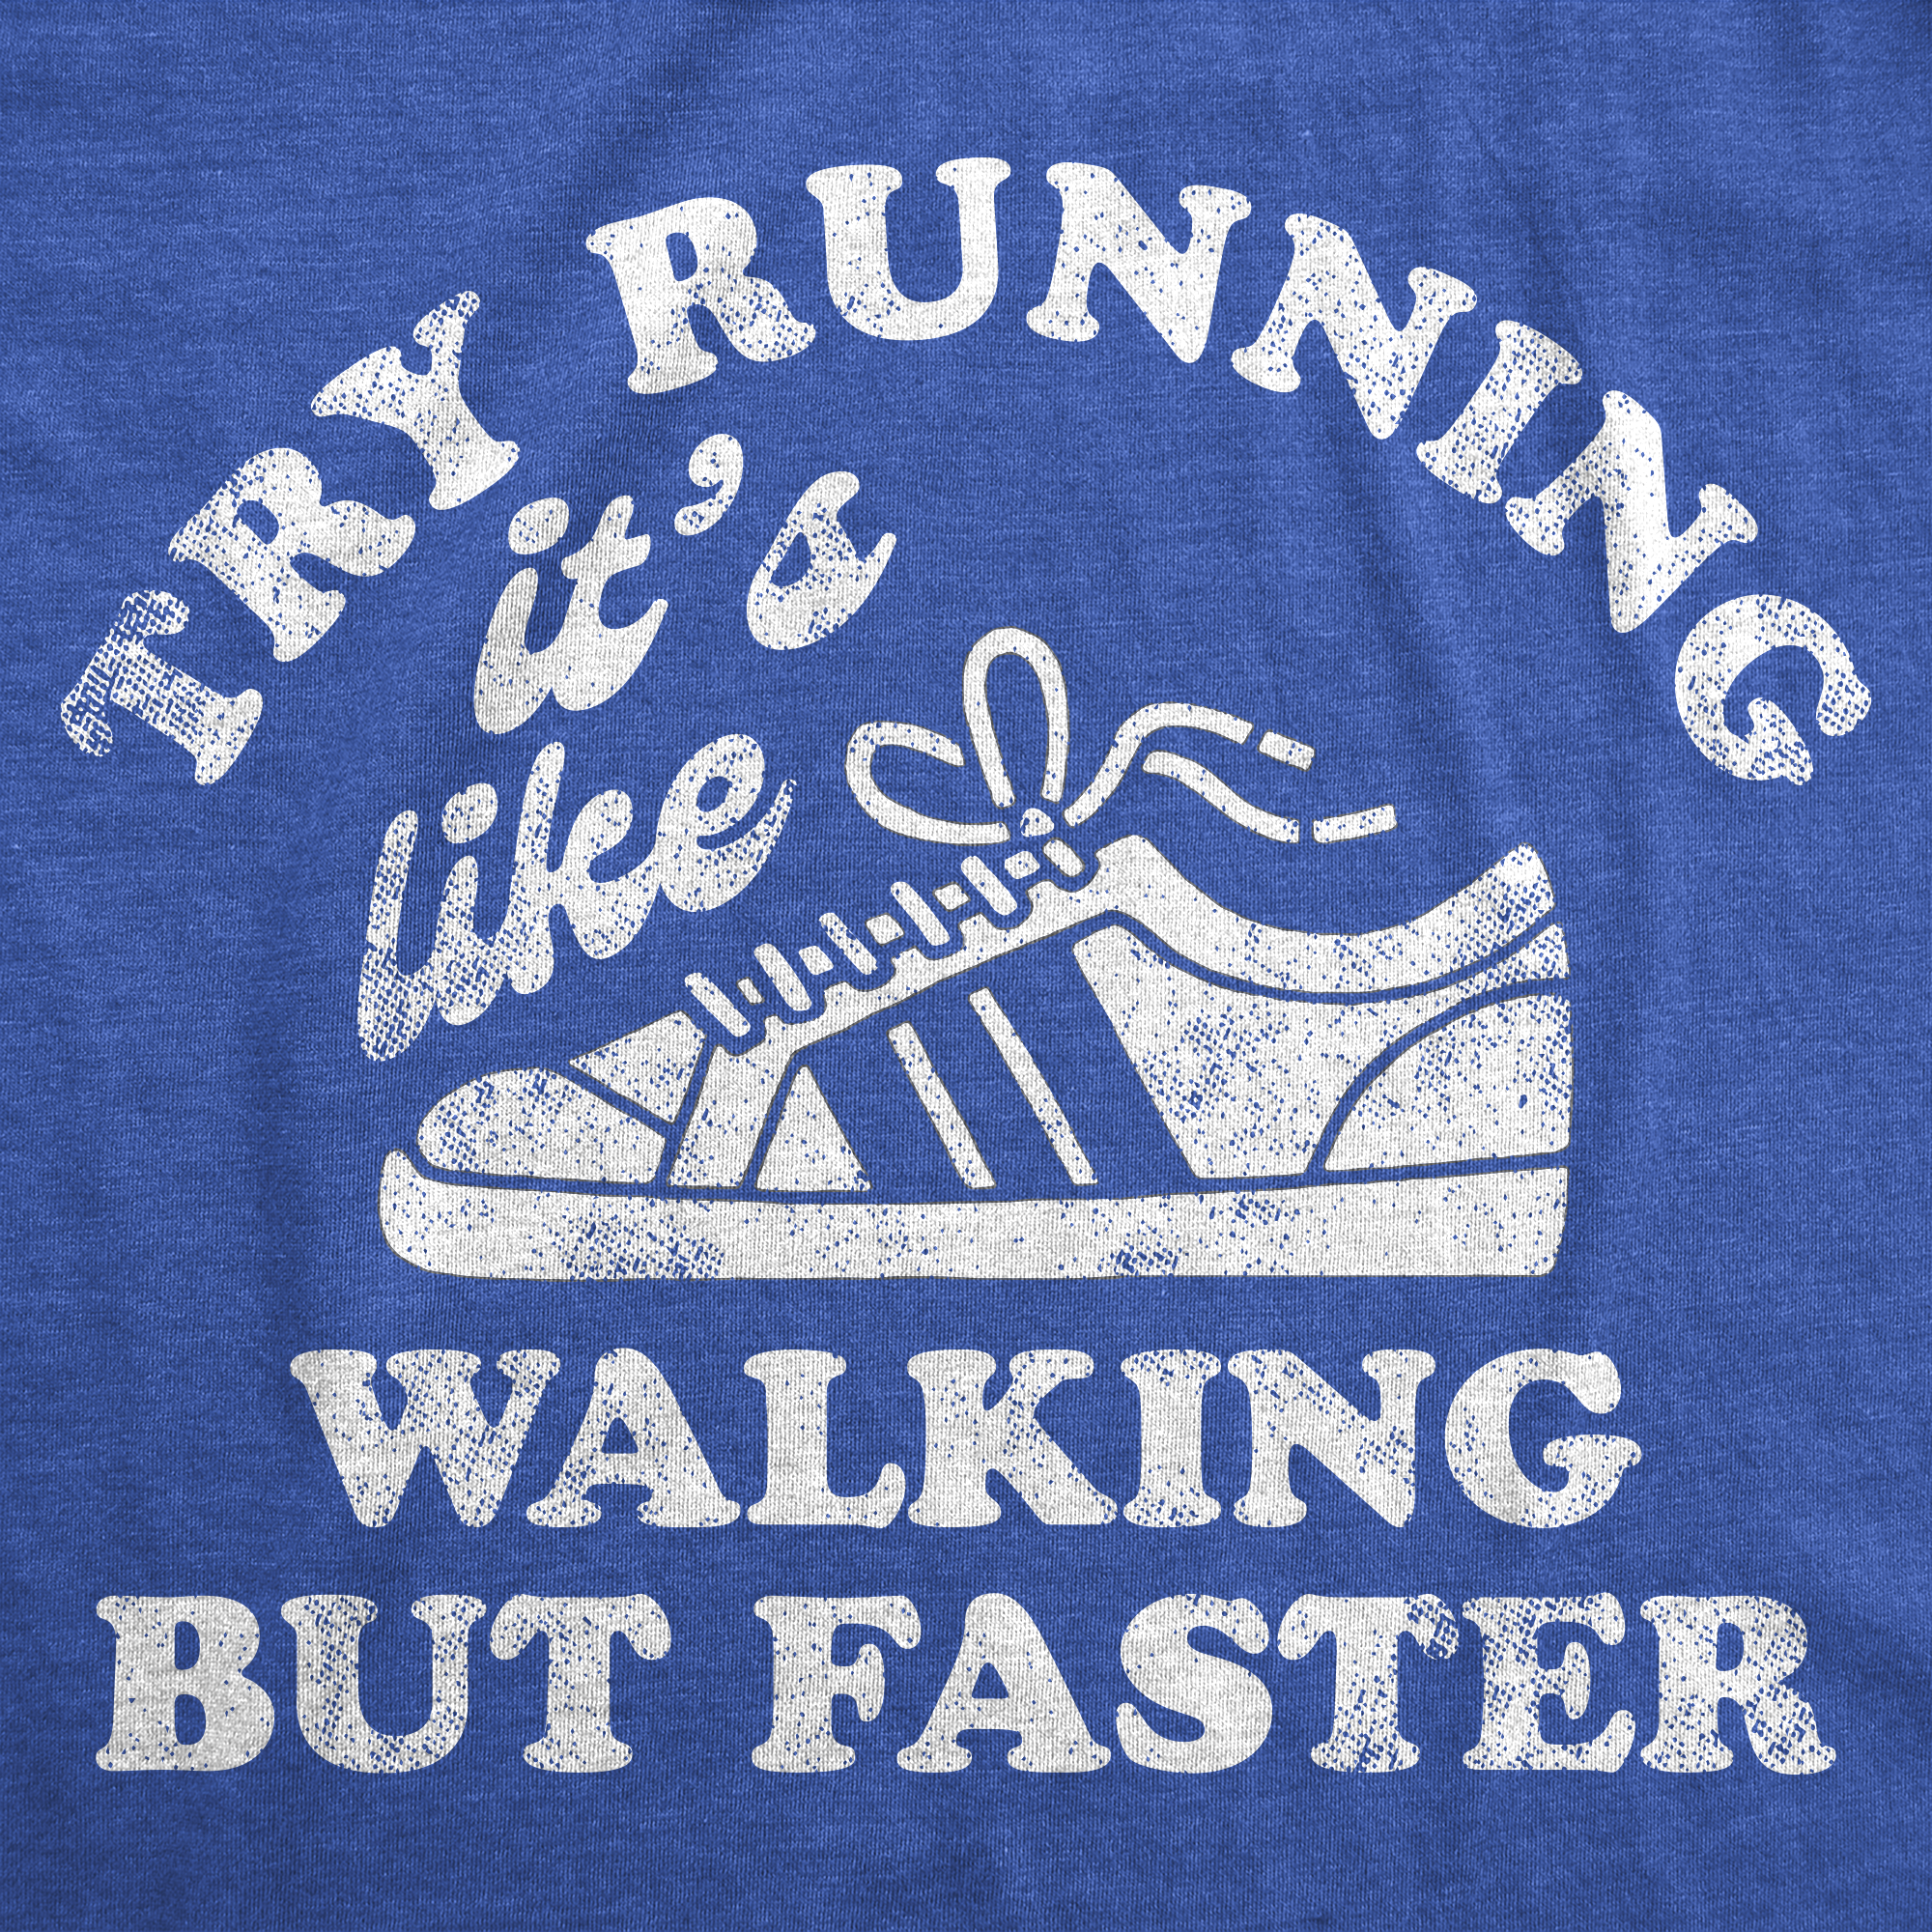 Funny Heather Royal - Try Running Try Running Its Like Walking But Faster Womens T Shirt Nerdy sarcastic Tee